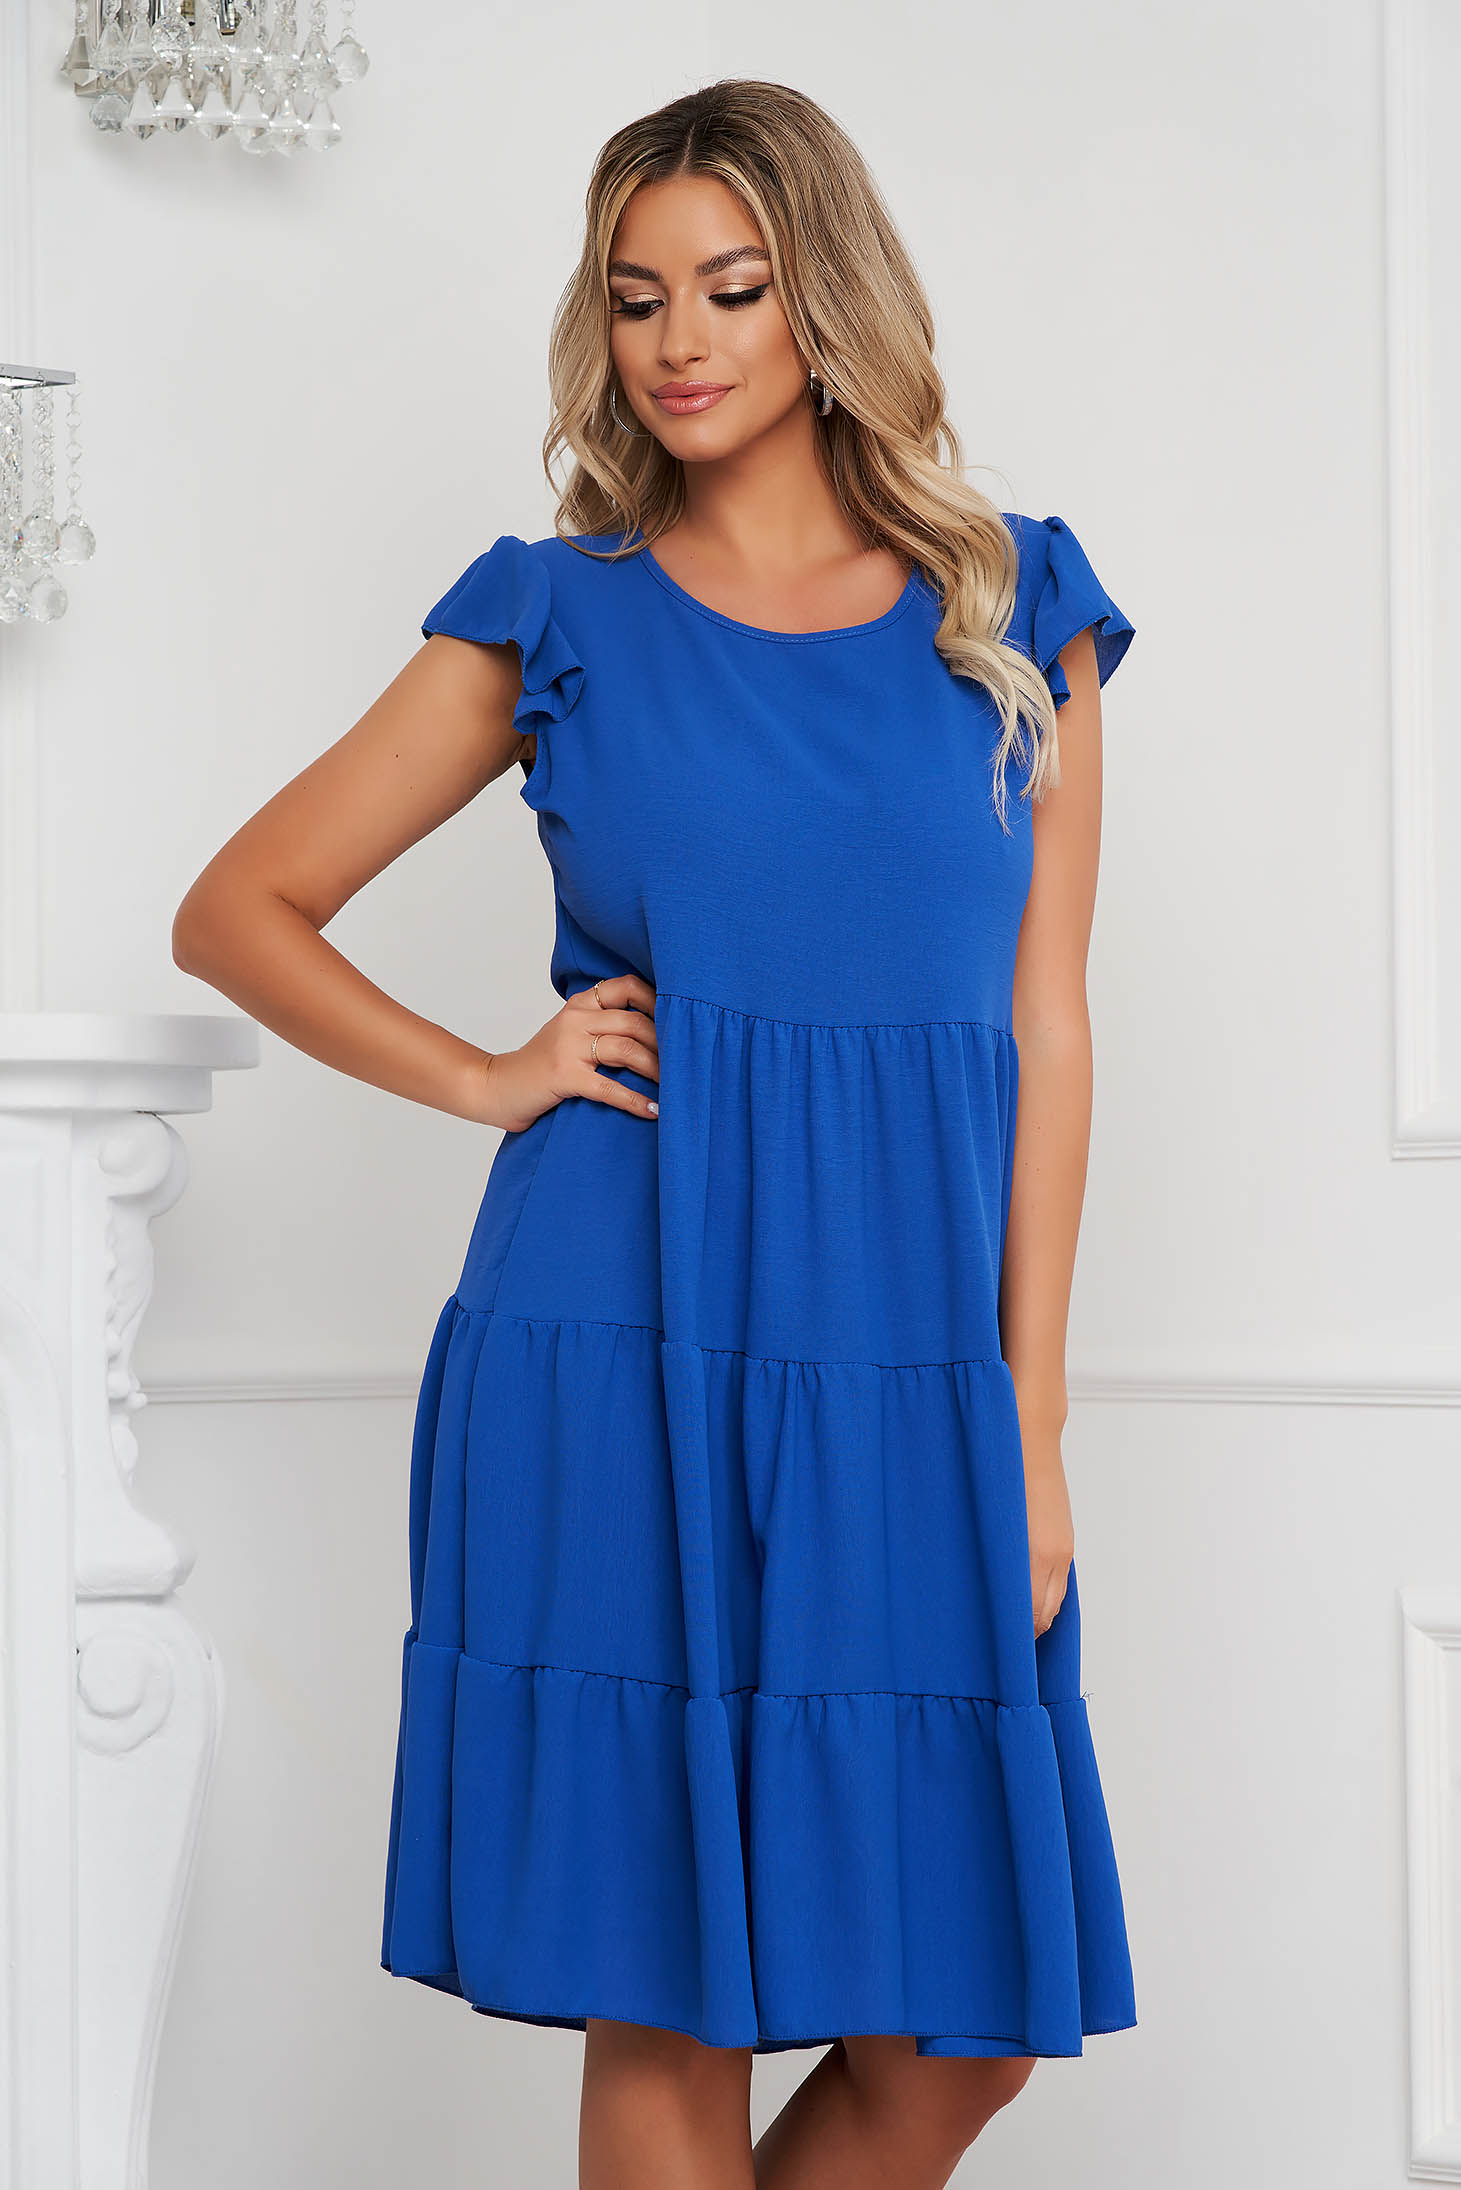 Blue dress thin fabric midi loose fit with ruffle details